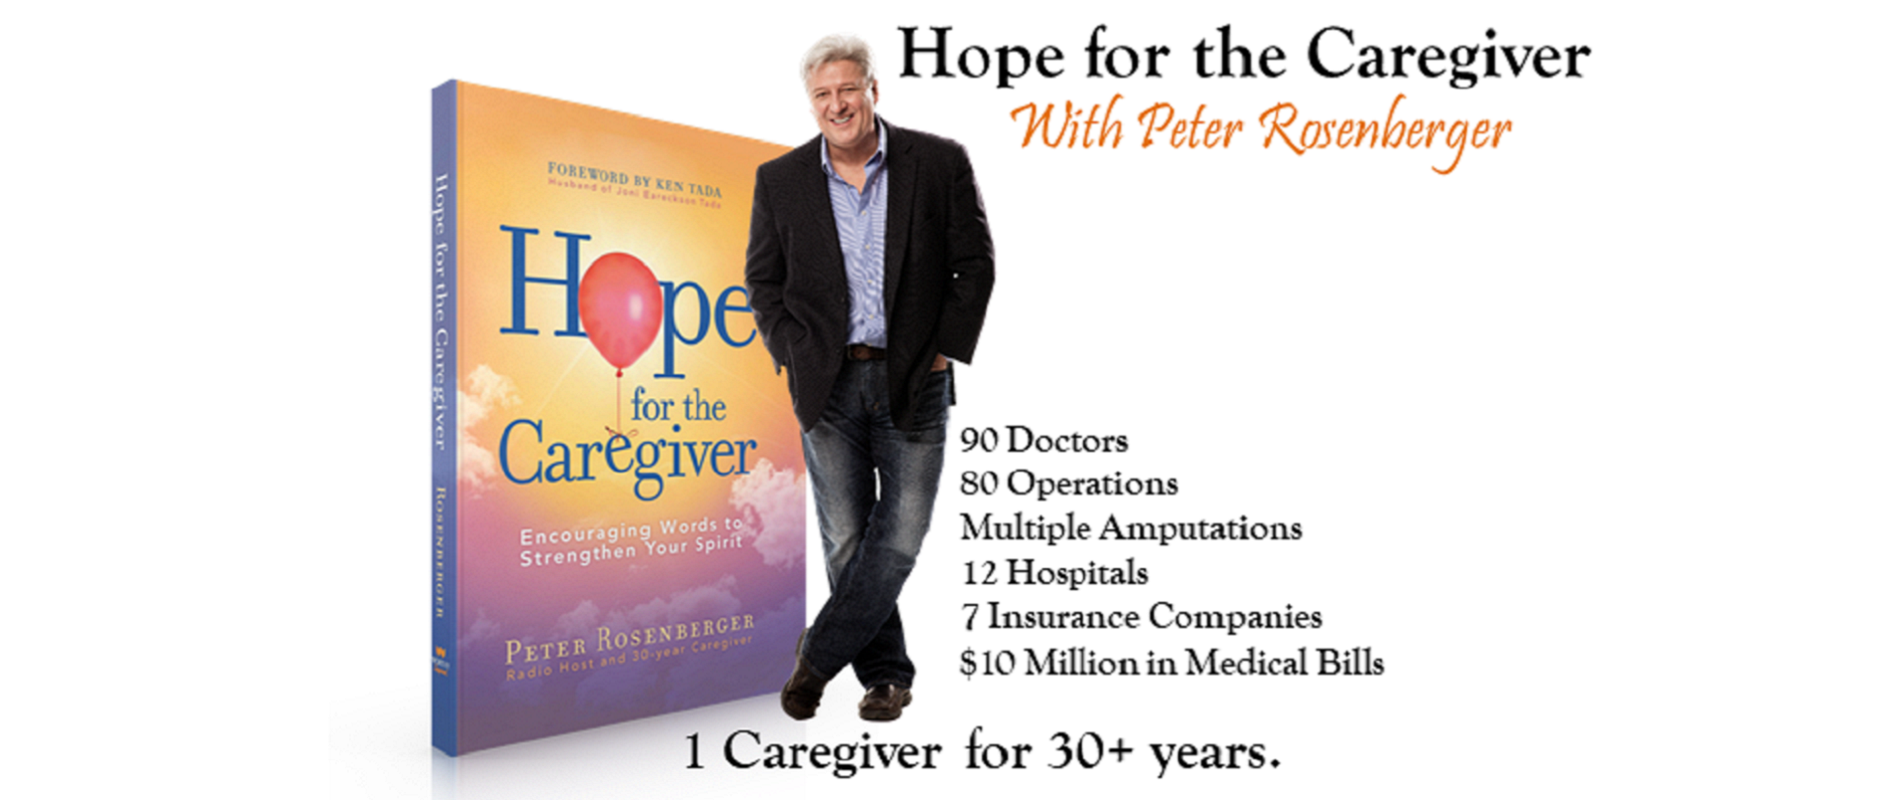 Hope for the Caregiver July 8 2018